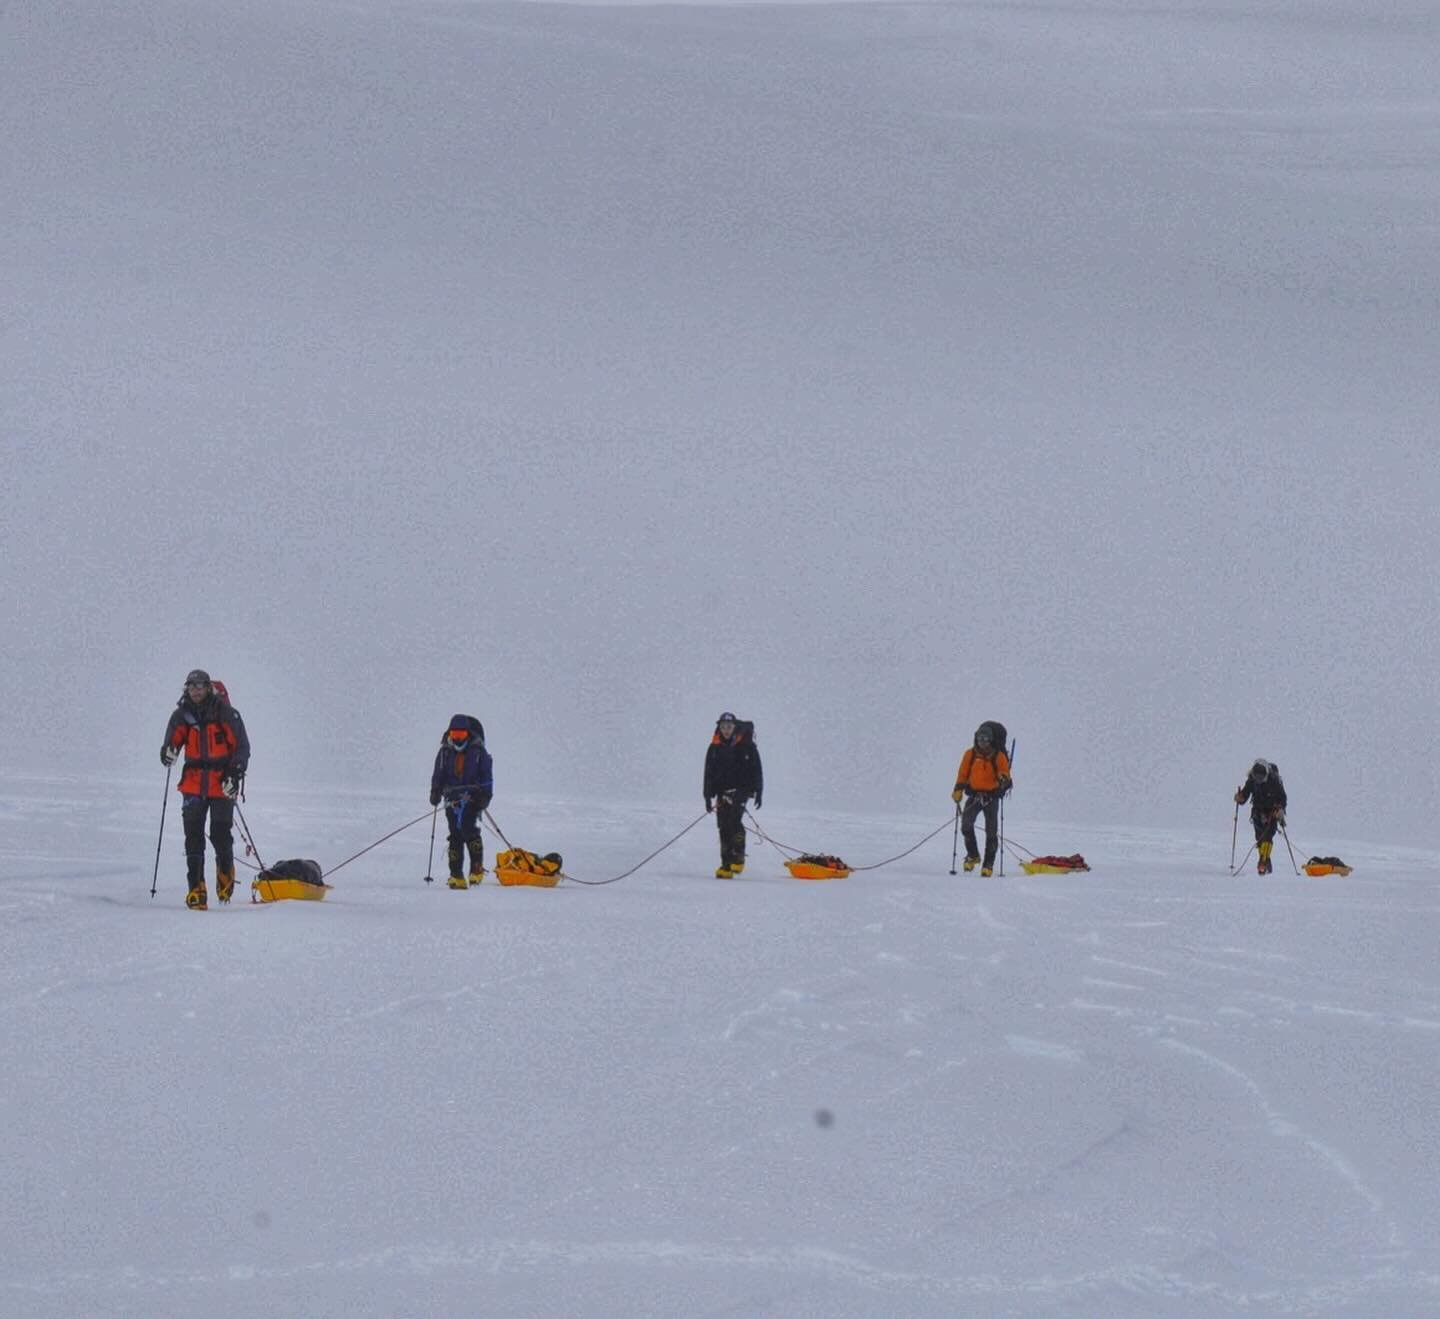 Final steps back to Vinson base camp after successfully summiting the 4,982m peak on 24th December 2023. We were roped together throughout the climb whilst we walked across the cravese fields and up the mountain to ensure we came back as a team!

I c